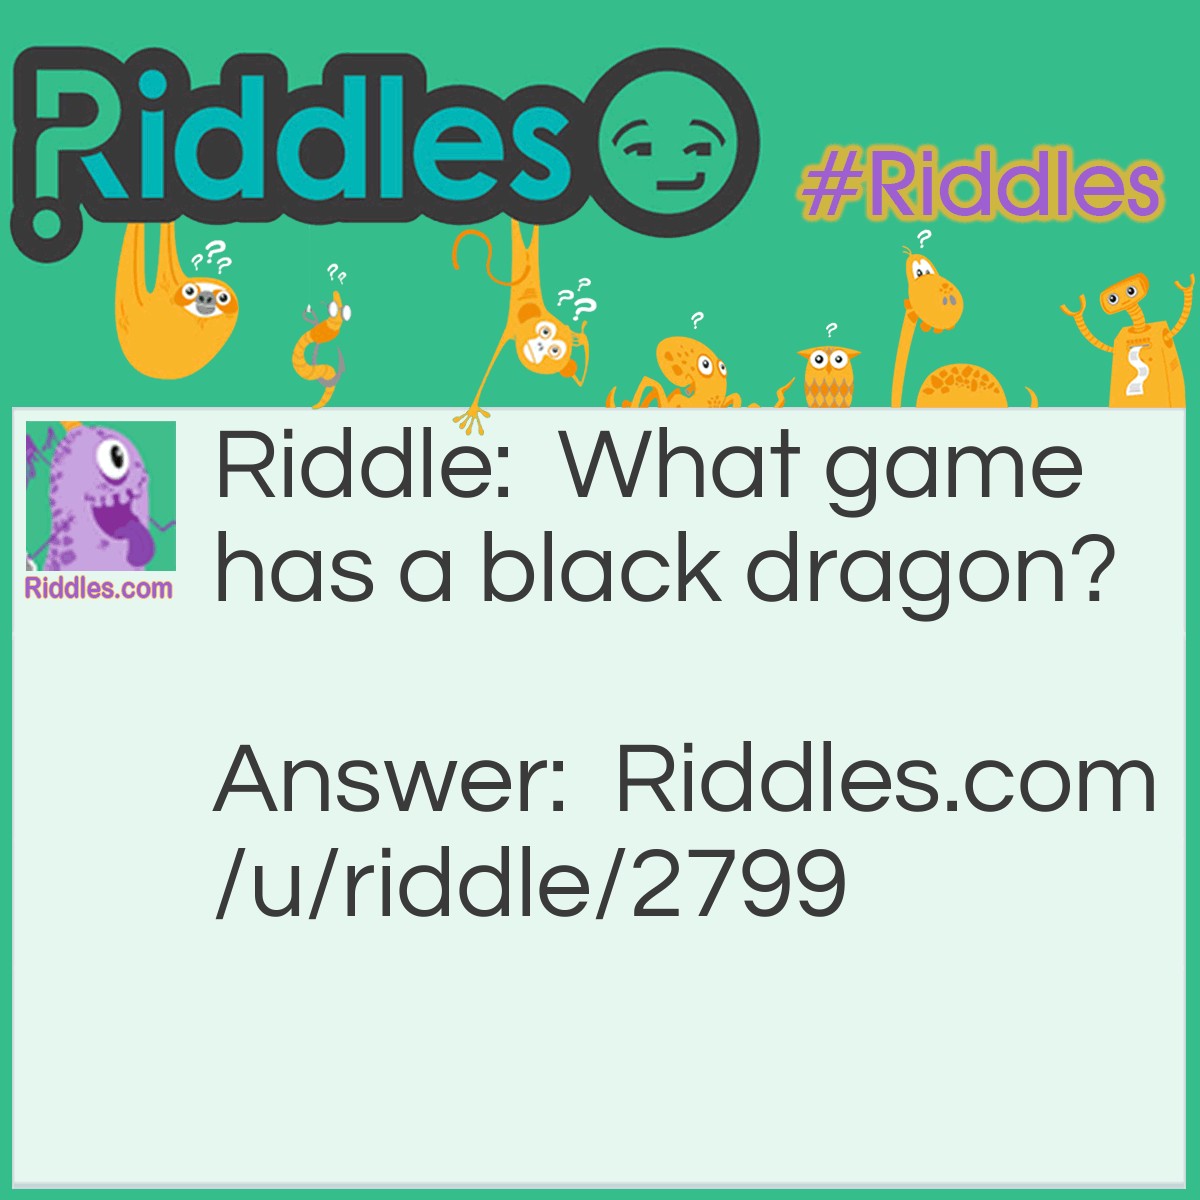 Riddle: What game has a black dragon? Answer: Skool of dragons.